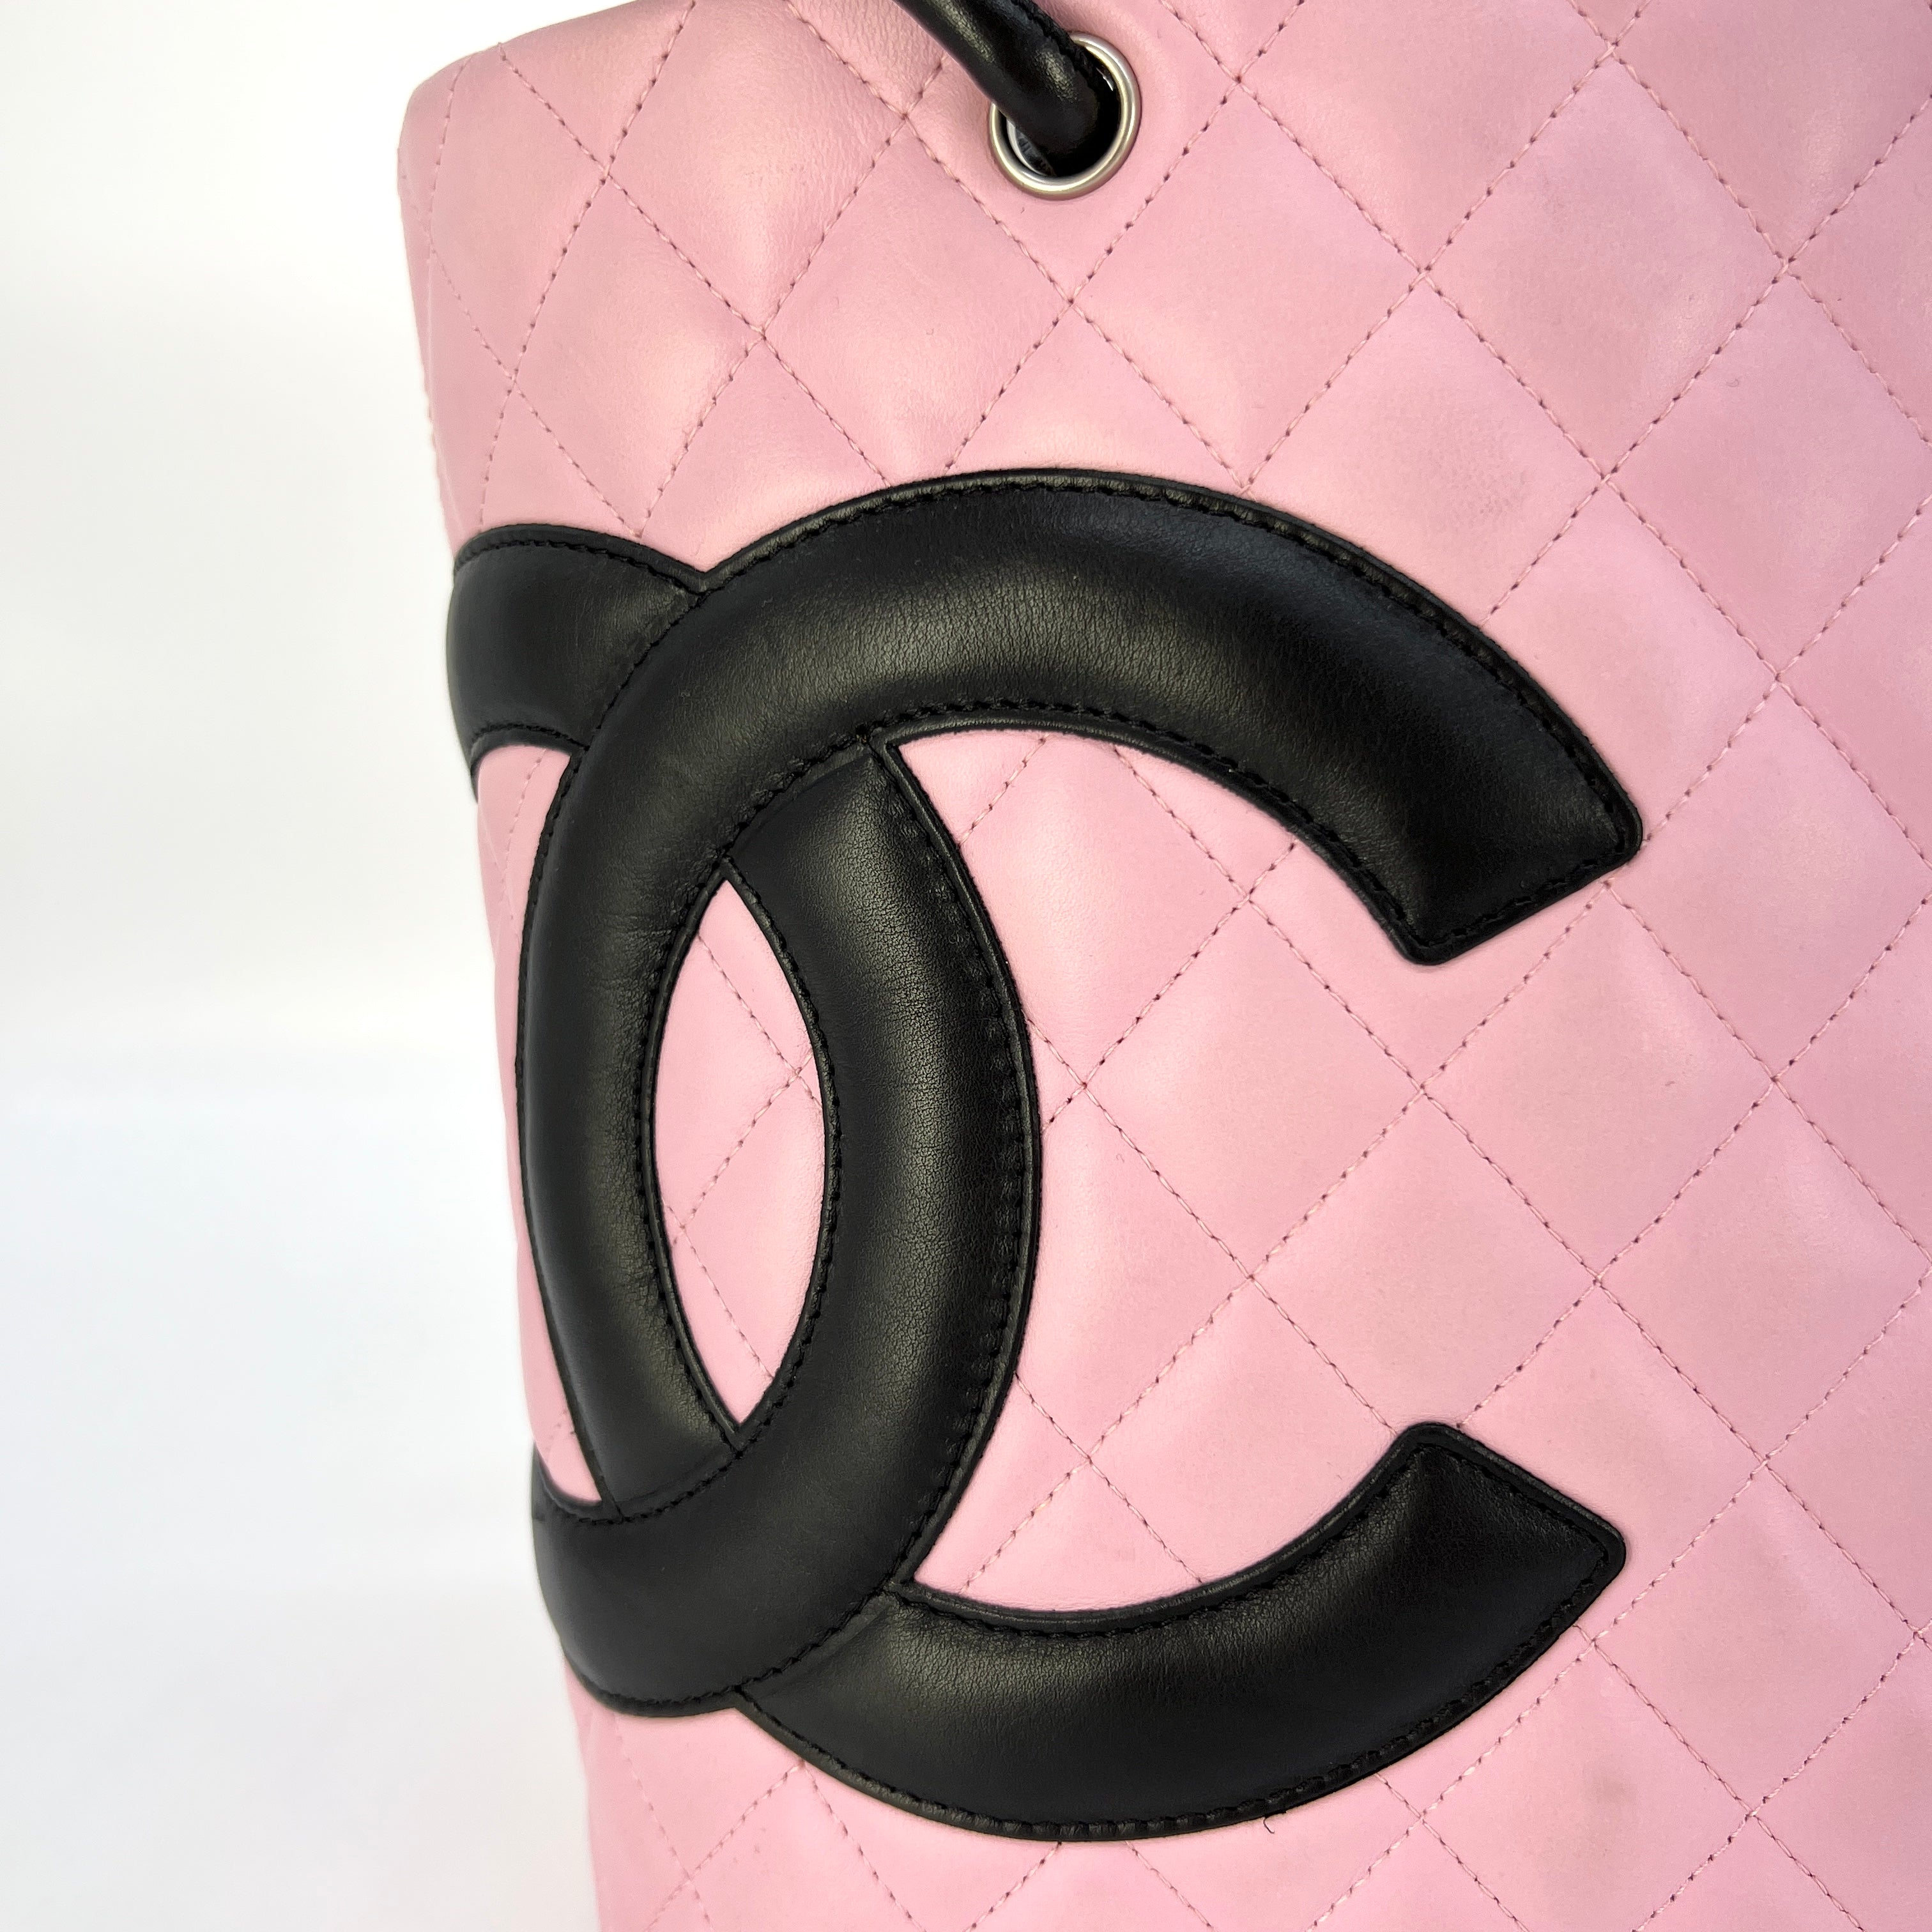 CHANEL Calfskin Quilted Medium Cambon Tote Pink Black [Guaranteed Authentic]